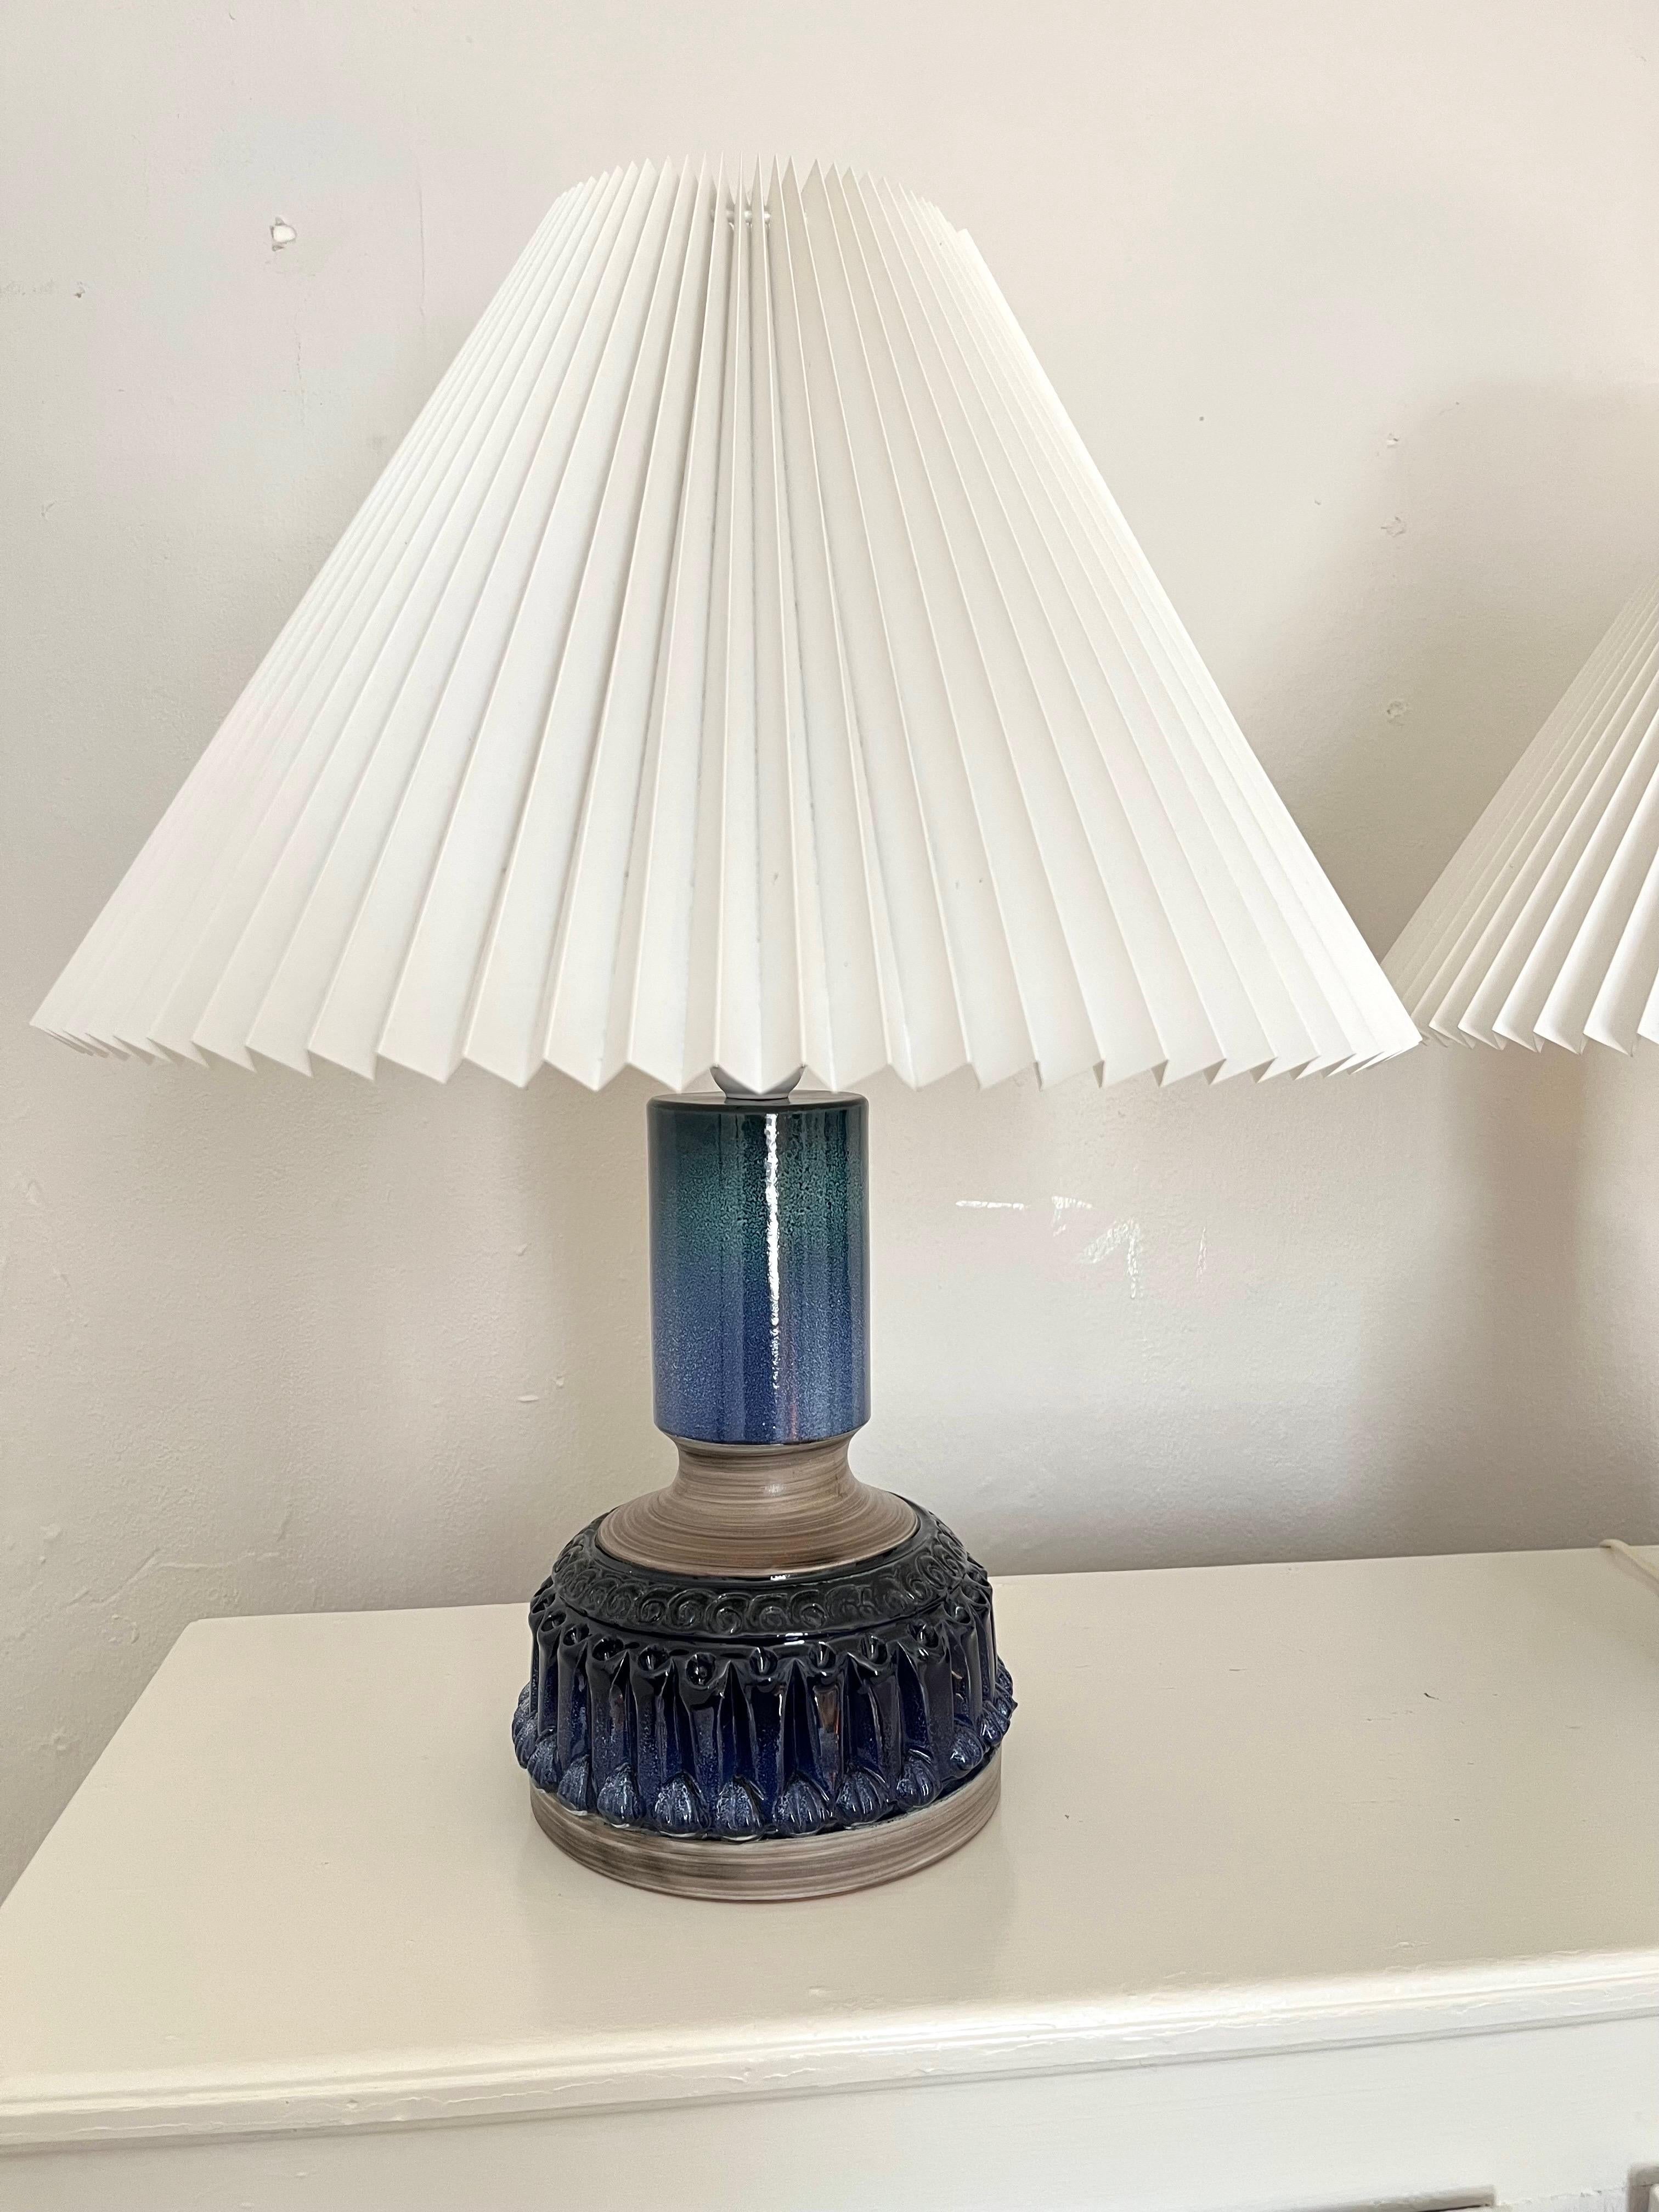 Pair of Vintage Italian Ceramic Table Lamps, 1960s

Illuminate your space with the charm of mid-century Italian design with this exquisite pair of ceramic table lamps. Crafted in the 1960s, these lamps feature intricate decorations and abundant